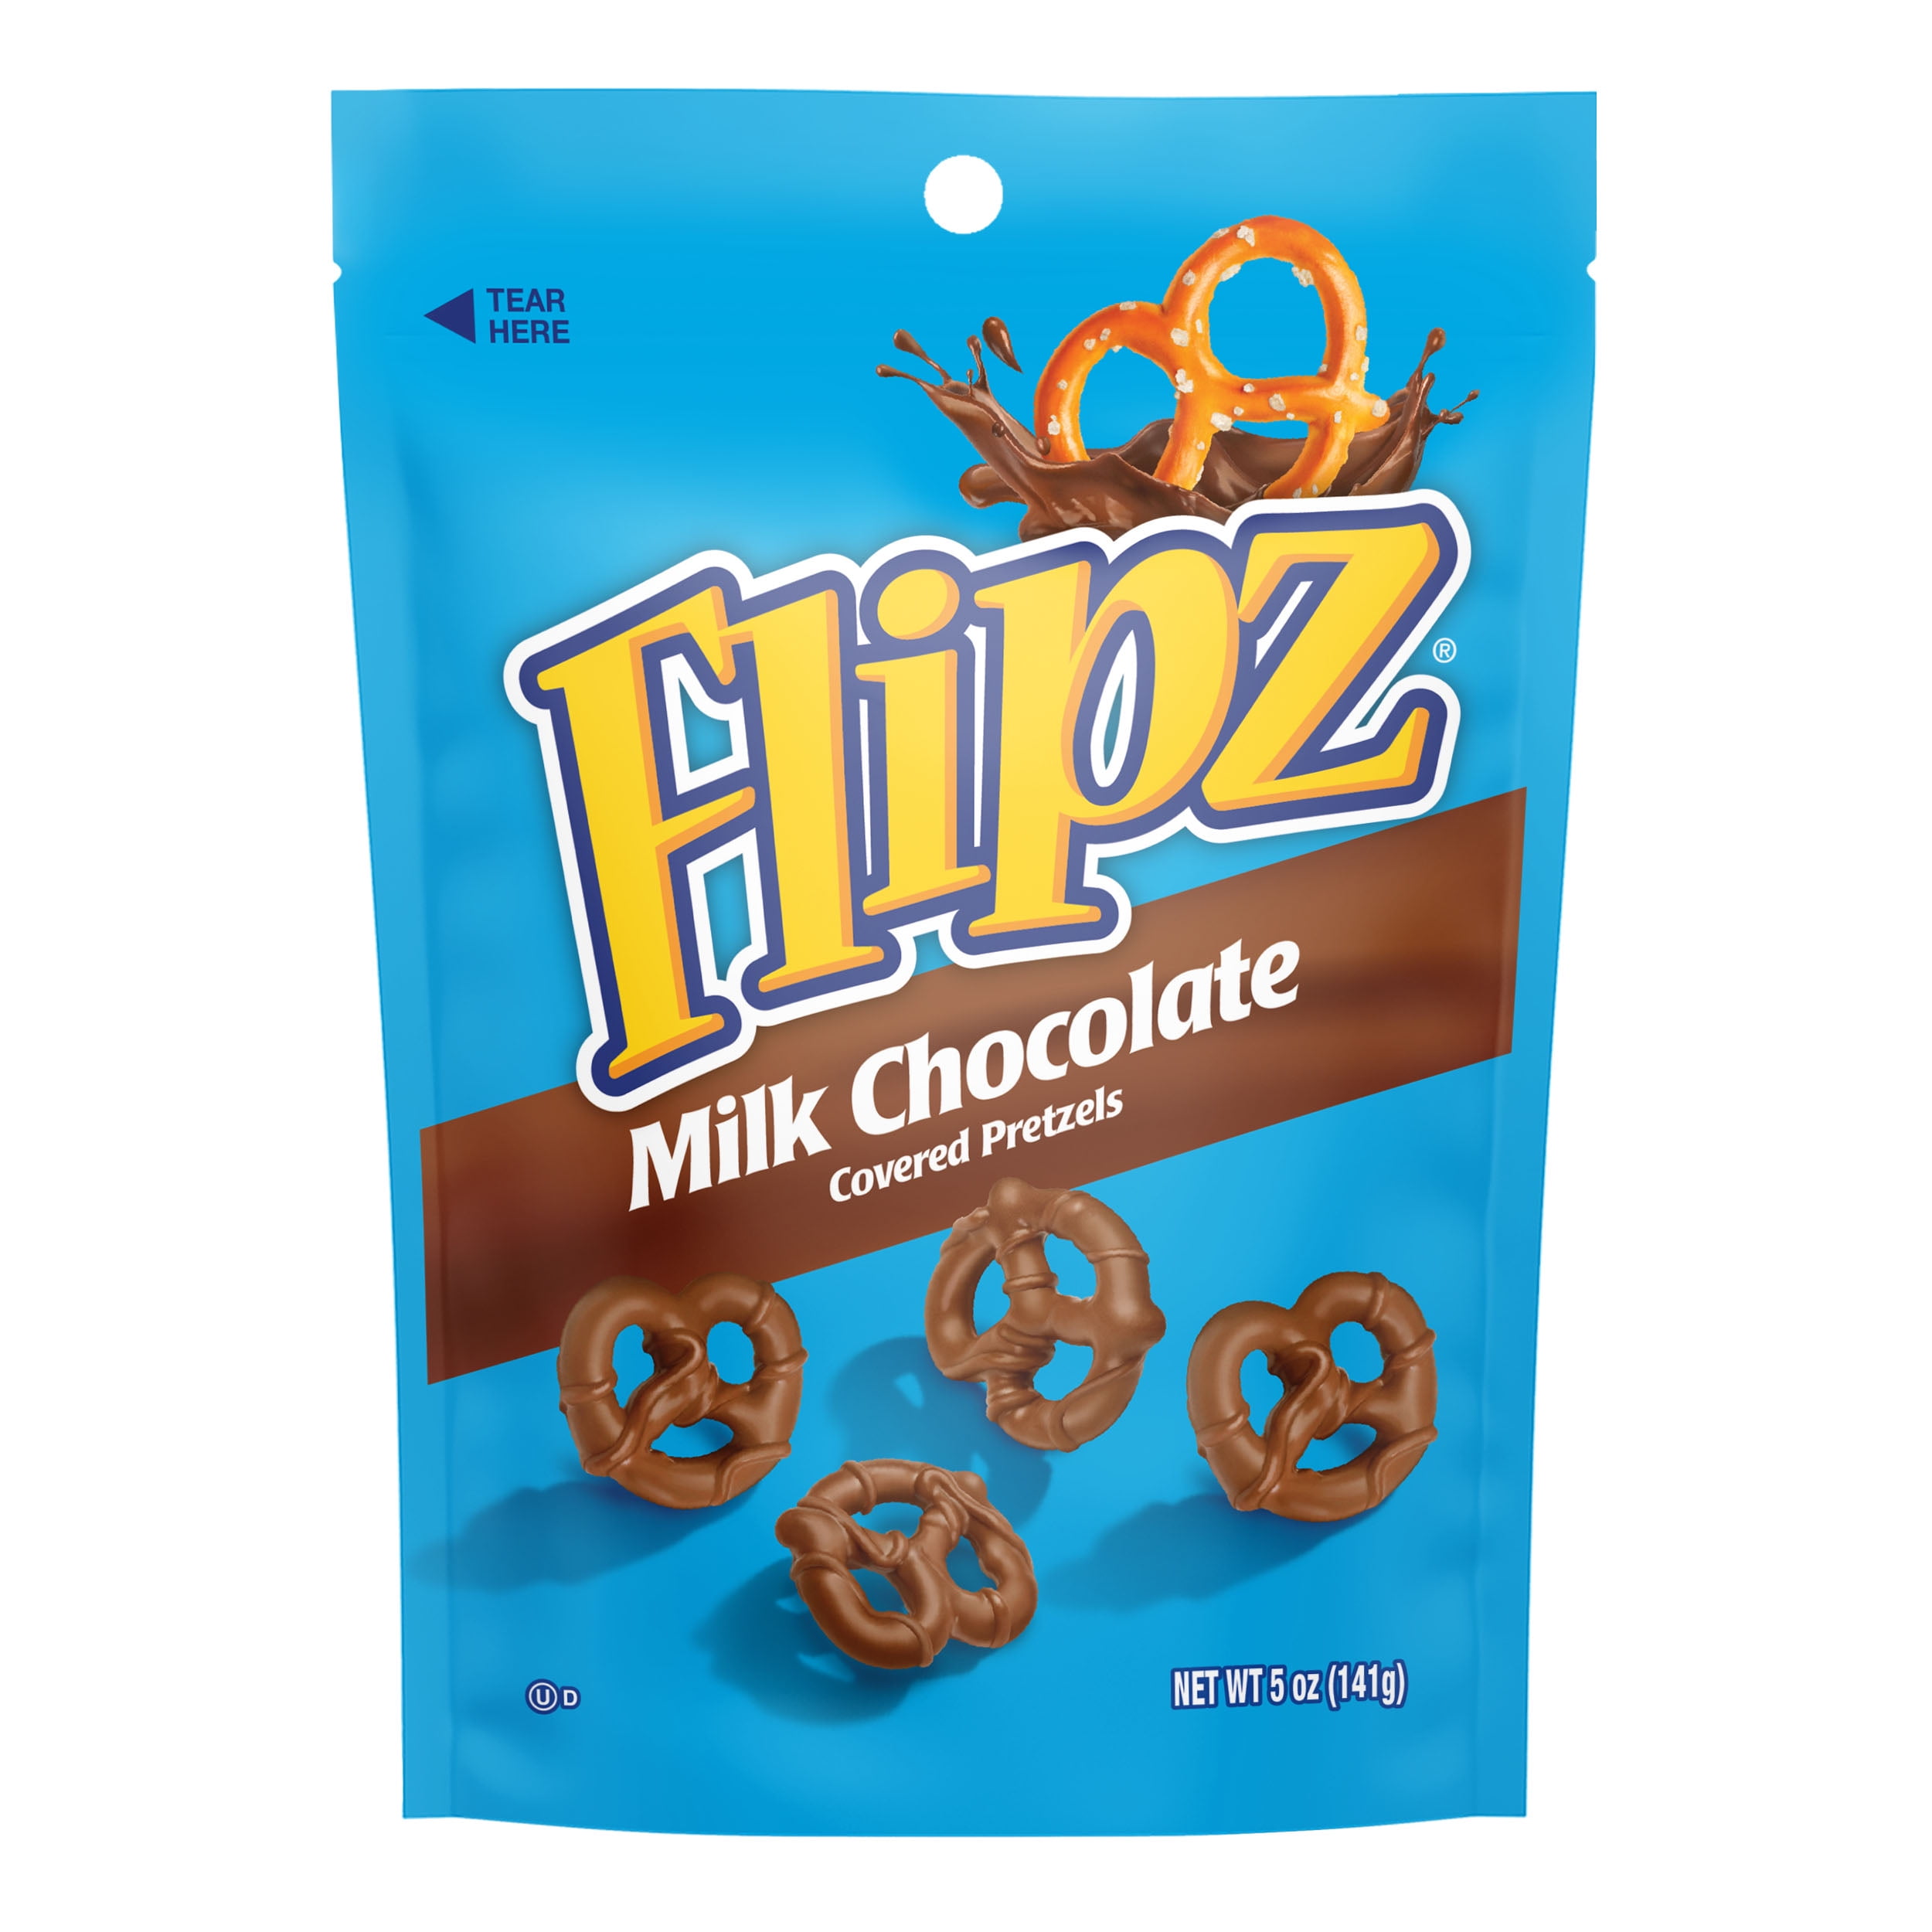 Picture of Flipz 9330697 5 oz Milk Chocolate Covered Pretzels - pack of 12